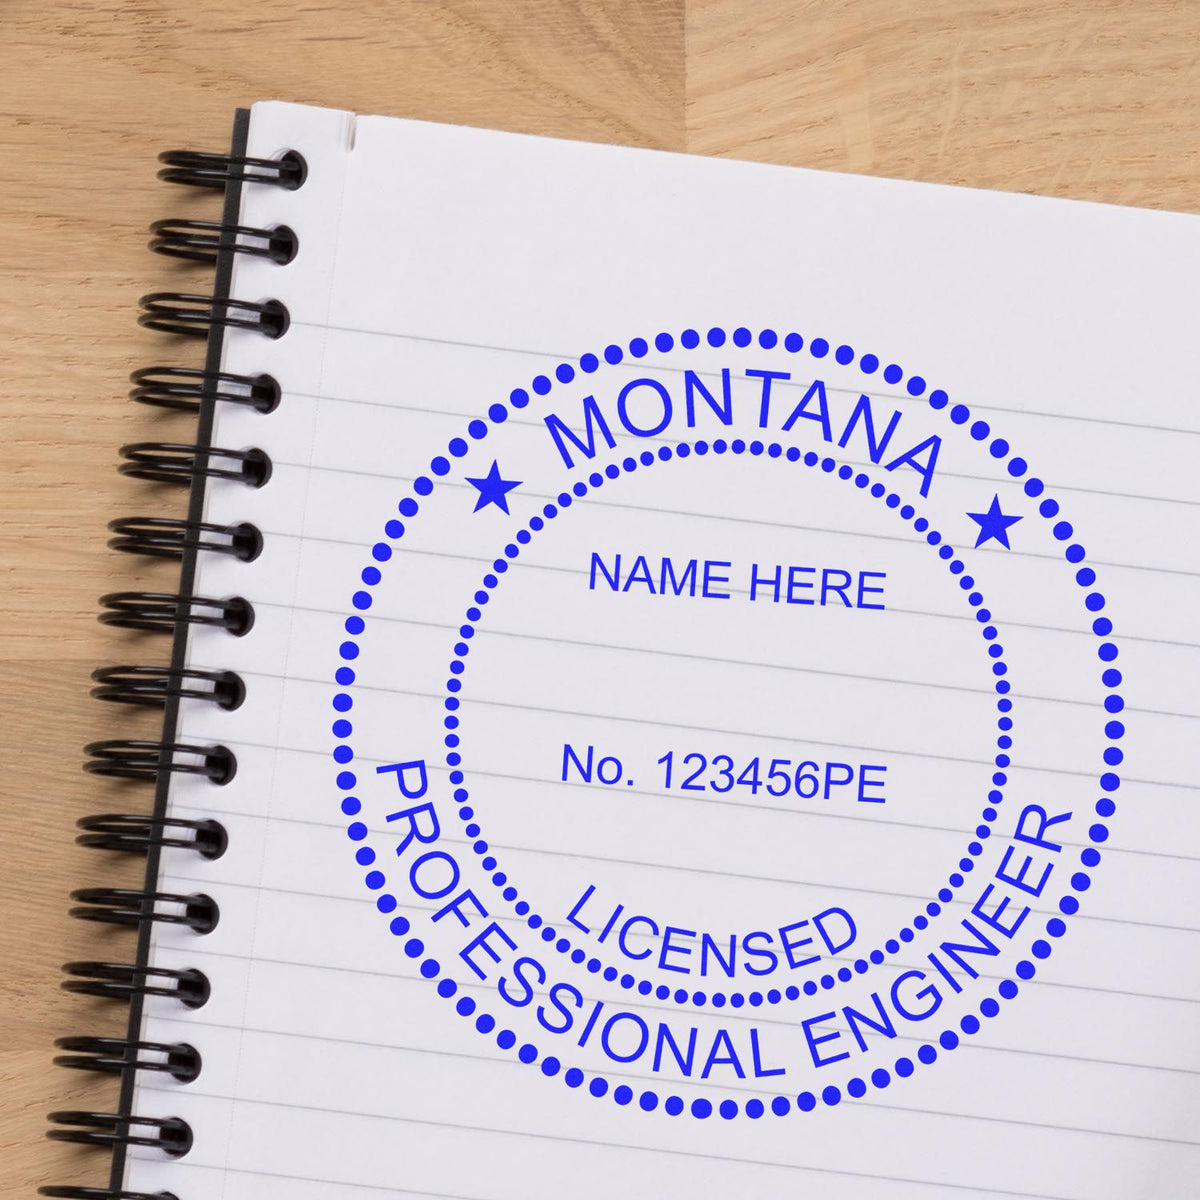 The Digital Montana PE Stamp and Electronic Seal for Montana Engineer stamp impression comes to life with a crisp, detailed photo on paper - showcasing true professional quality.